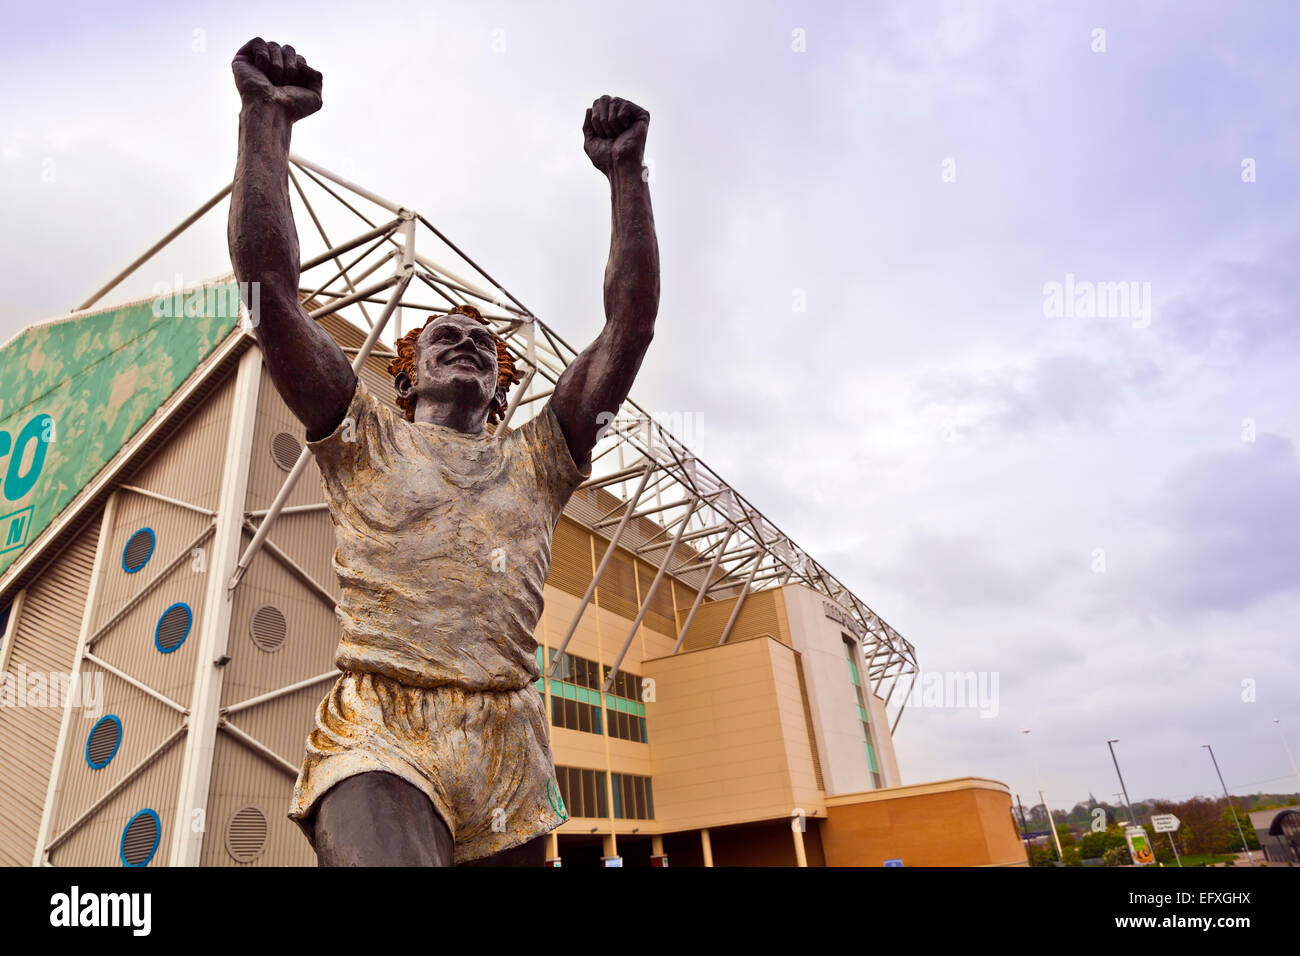 A statue of former Leeds' captain Billy Bremner at Elland Road stadium, home of Leeds United Football Club. Stock Photo